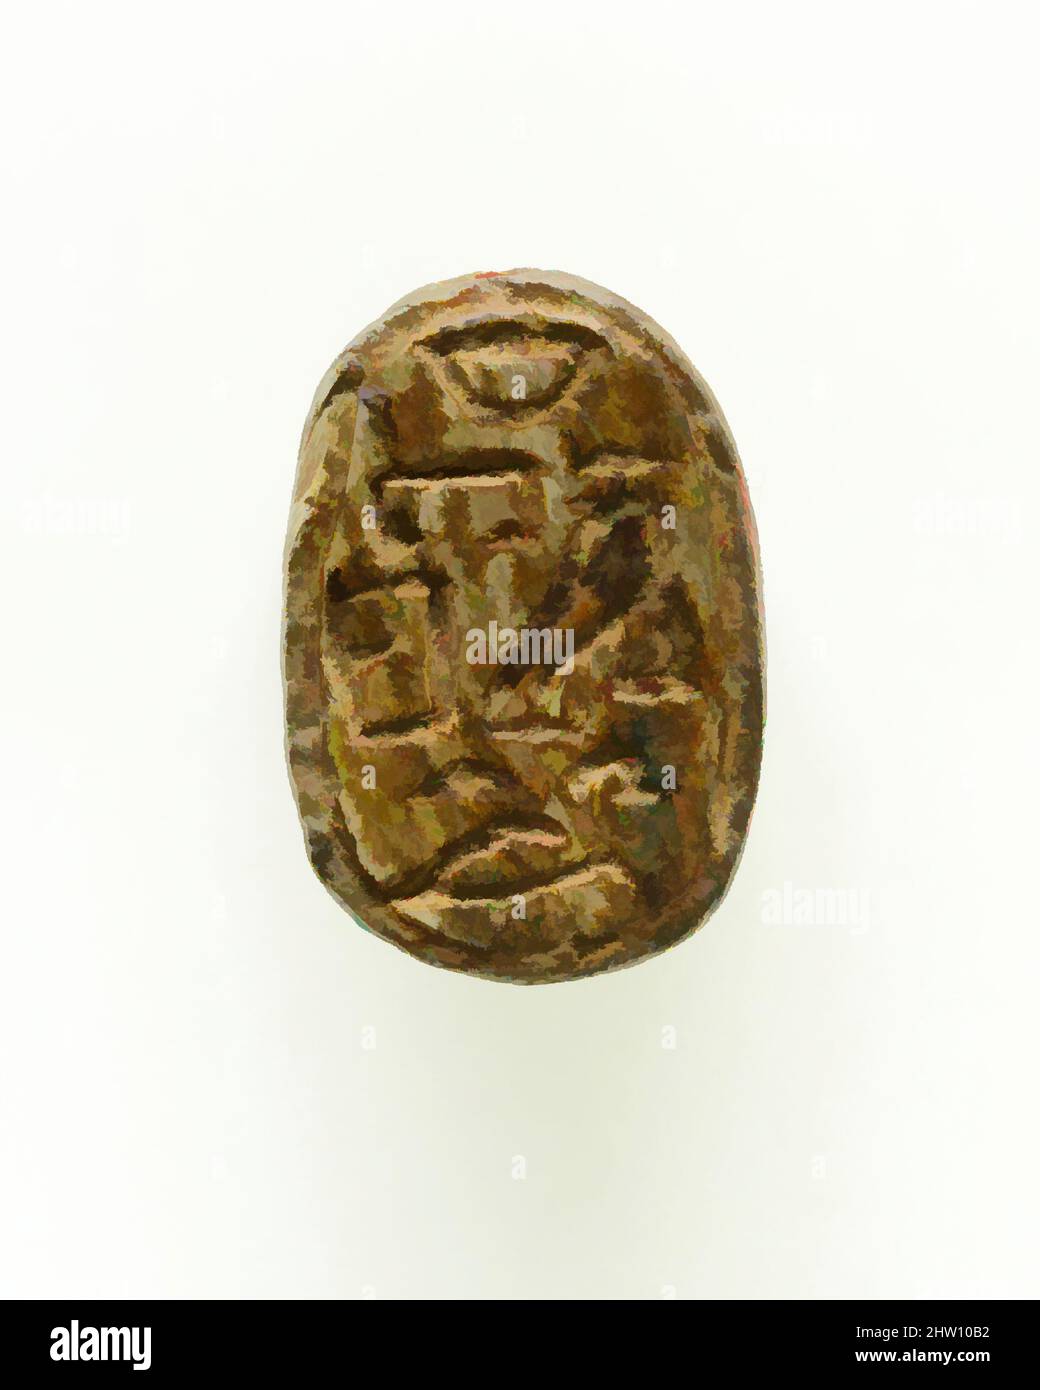 Art inspired by Scarab of an Official, Middle Kingdom–Second Intermediate Period, Dynasty 12–18, ca. 1981–1550 B.C., From Egypt, Memphite Region, Lisht North, Cemetery, Radim, Steatite, l. 1.8 c m (11/16 in, Classic works modernized by Artotop with a splash of modernity. Shapes, color and value, eye-catching visual impact on art. Emotions through freedom of artworks in a contemporary way. A timeless message pursuing a wildly creative new direction. Artists turning to the digital medium and creating the Artotop NFT Stock Photo